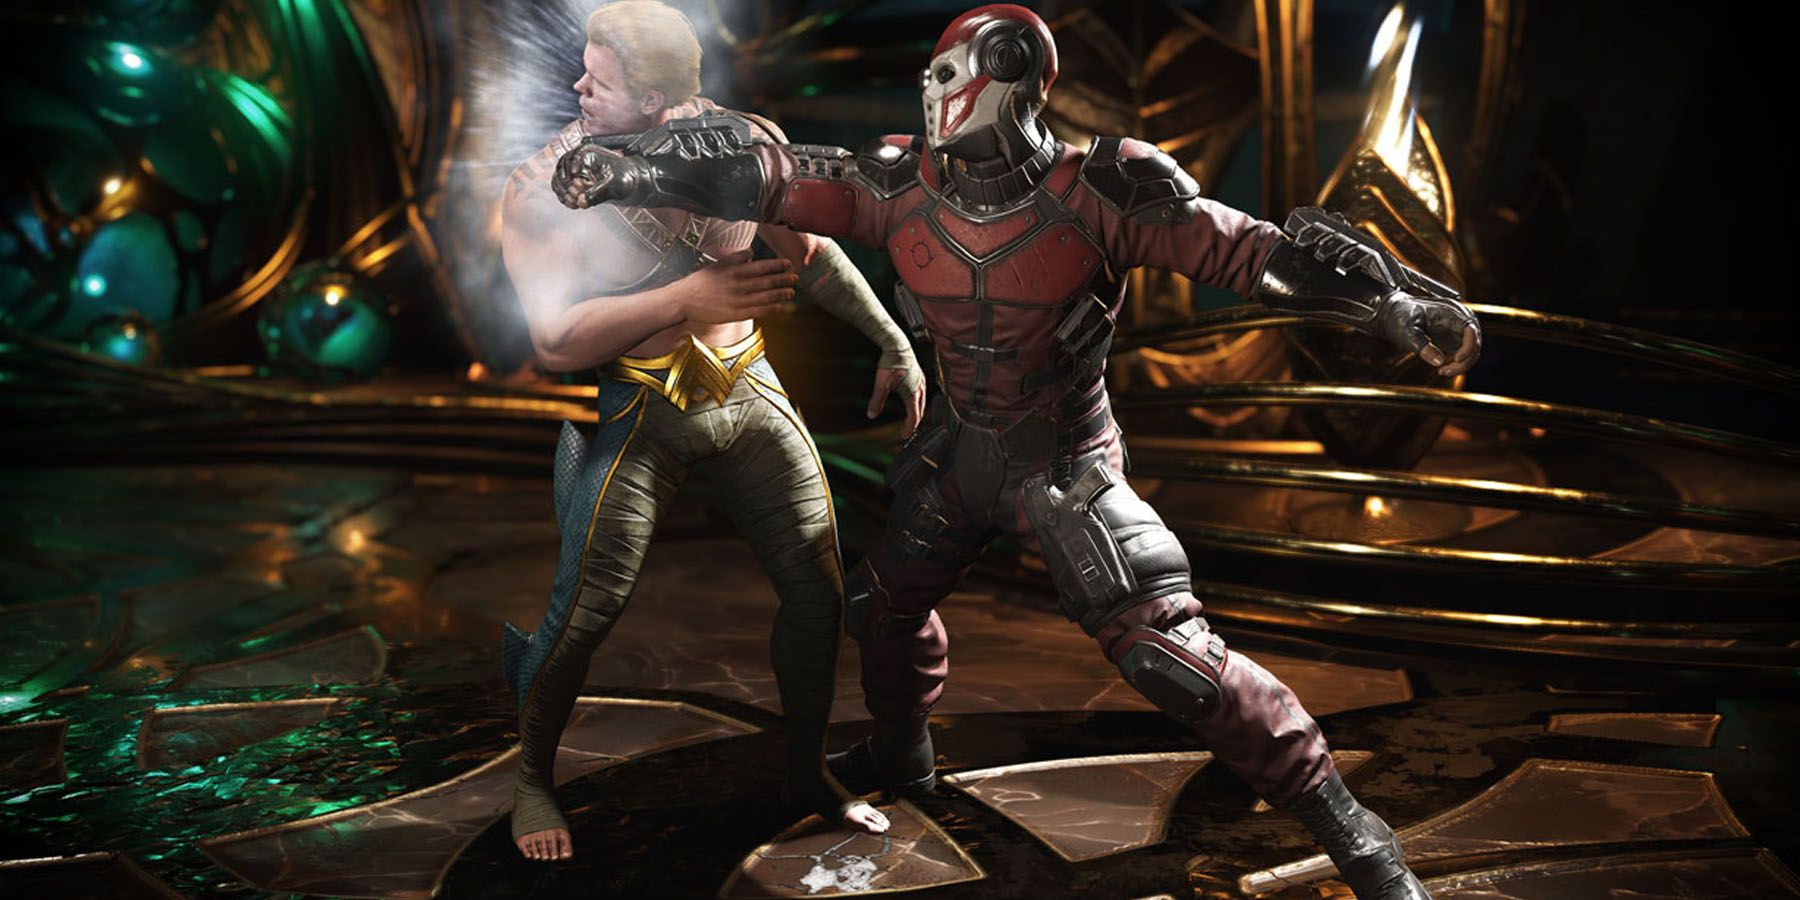 Dishing out a super move in Injustice 2